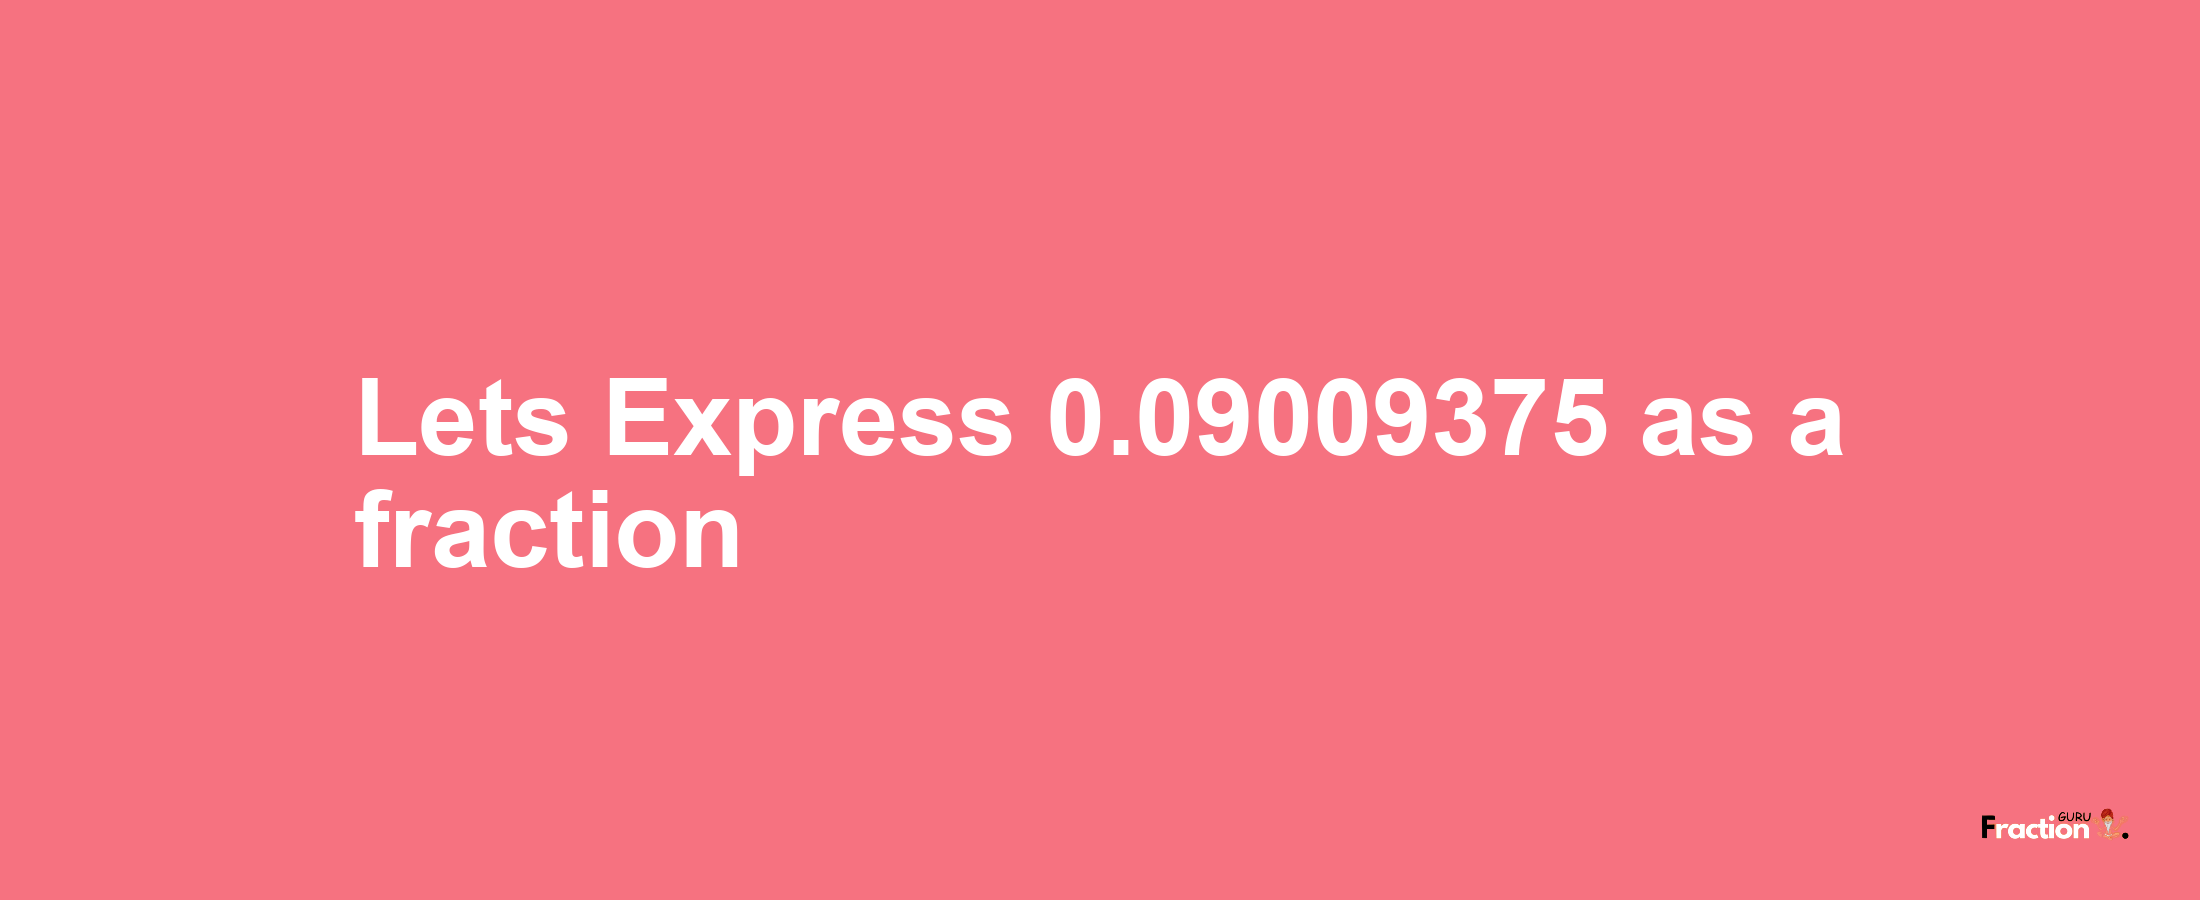 Lets Express 0.09009375 as afraction